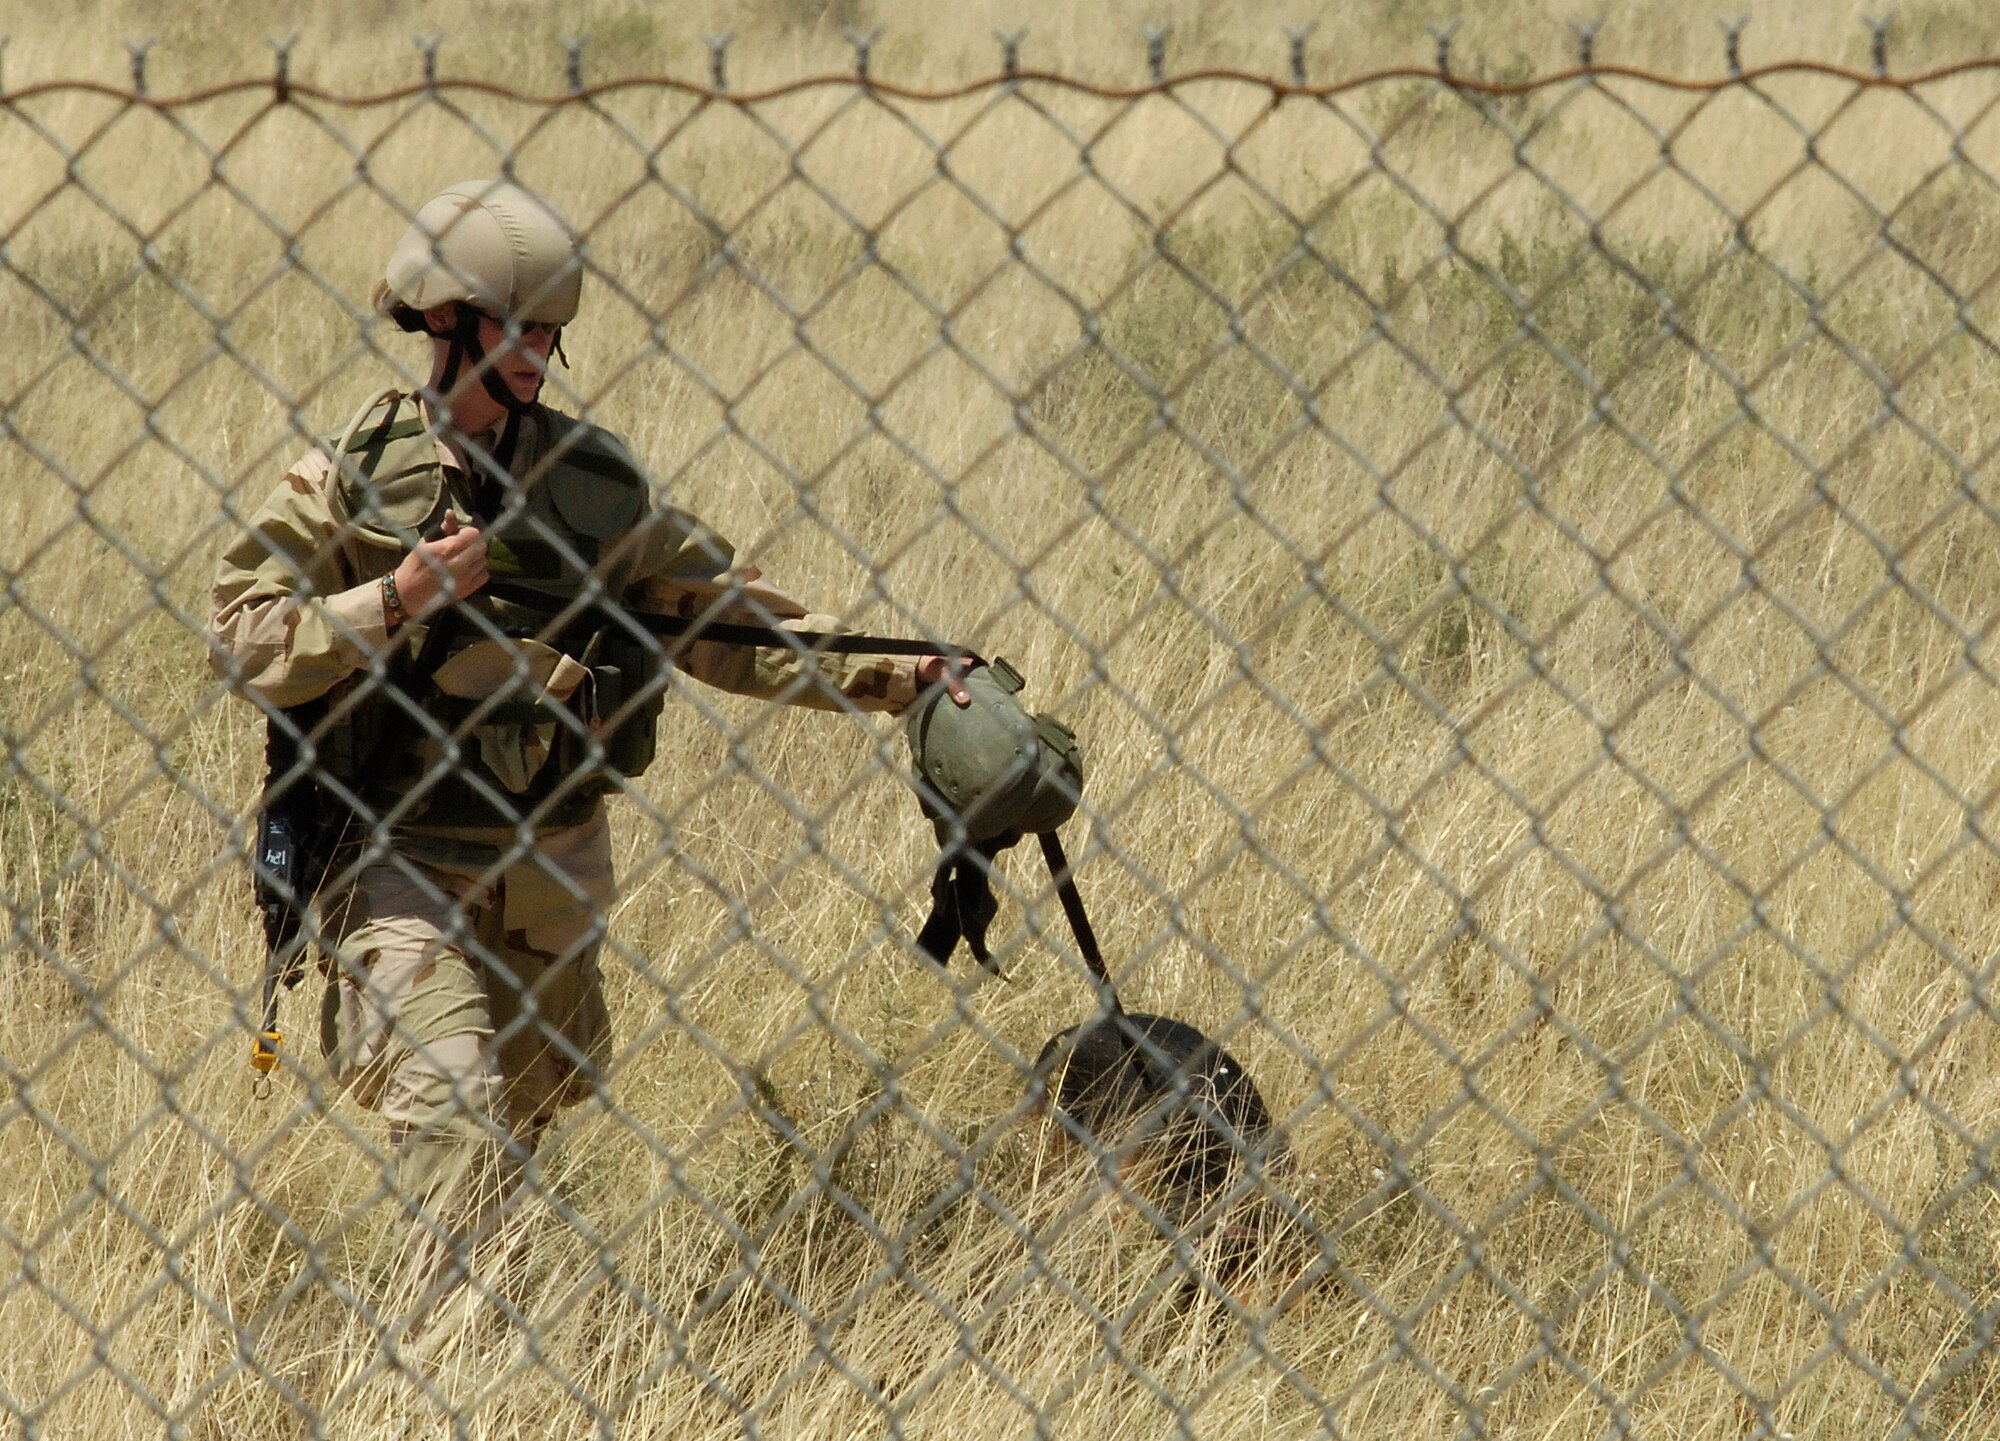 A 49th Security Forces Squadron Airman and canine performs a sweep outside the wire of the simulated deployed location Holloman's Phase II exercise. (U.S. Air Force photo by Airman 1st Class Michael Means)